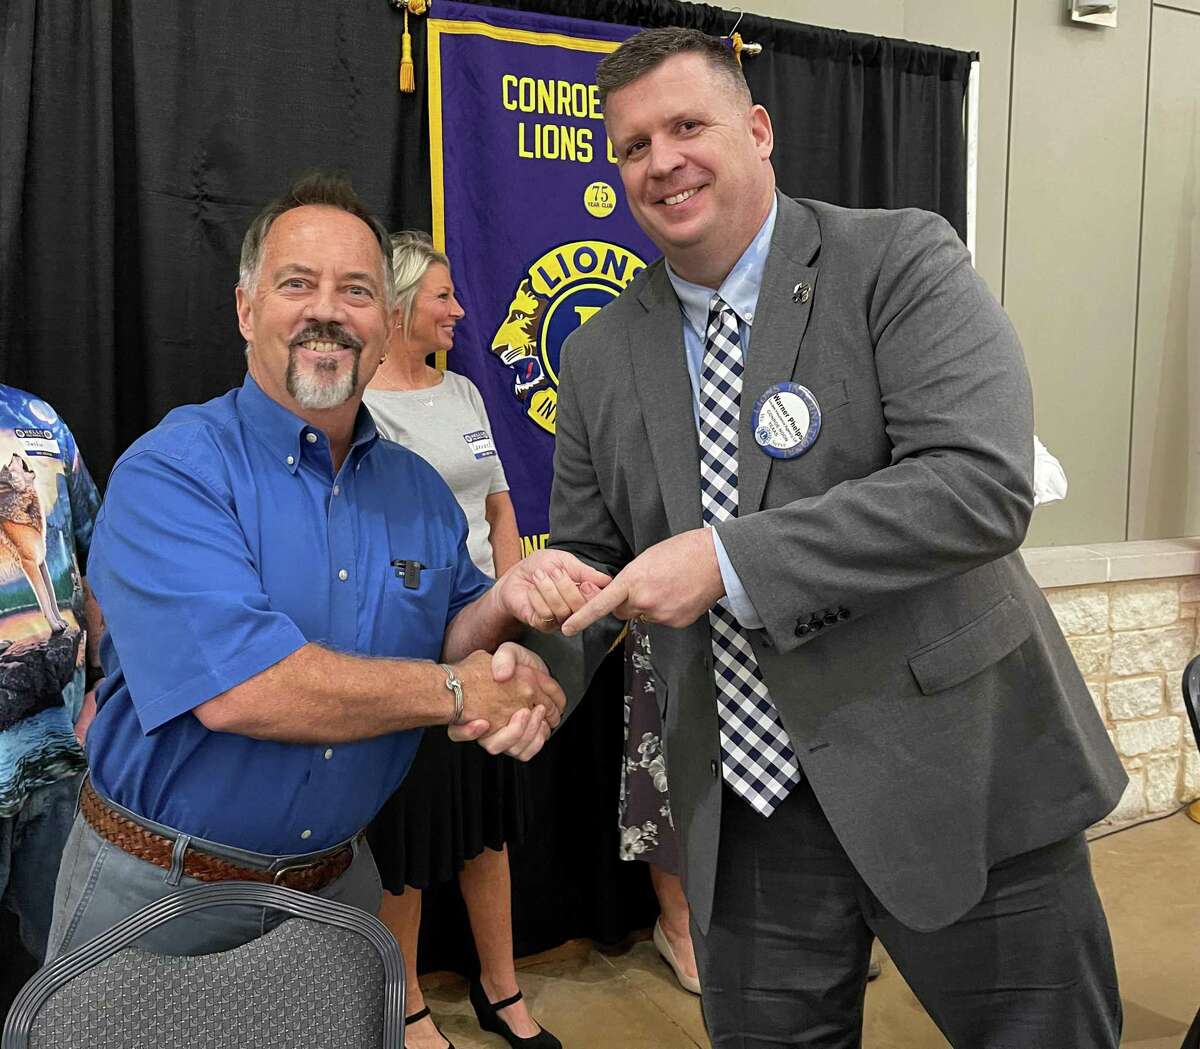 The Conroe Noon Lions Club President Warner Phelps, right, thanks Pastor Jeff Williams, left, for presenting a program last week about the Eagle’s Nest Ministries and their after program, which assist recently released felons assimilate back into society.